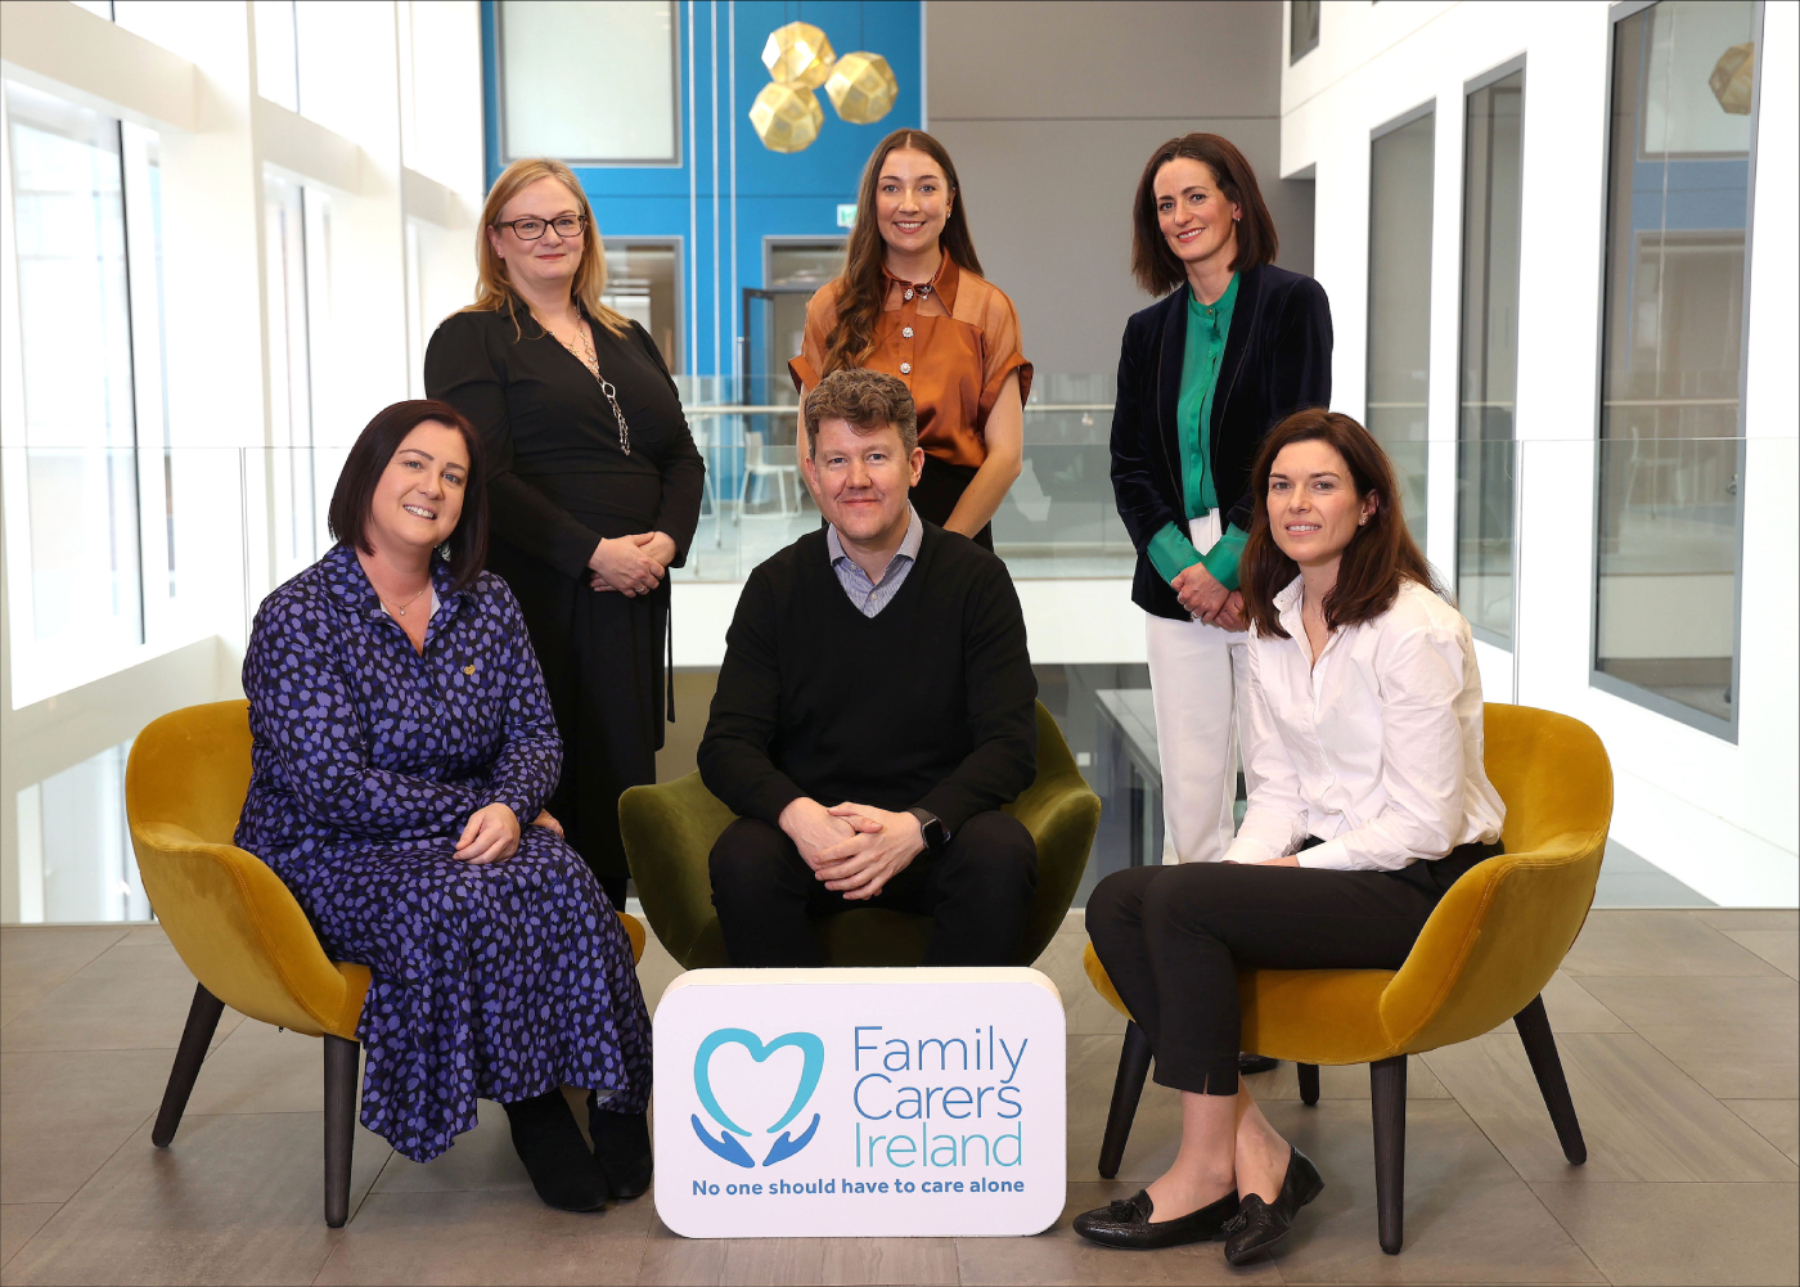 Bank of Ireland team pictured with the "Family Carers Ireland" members